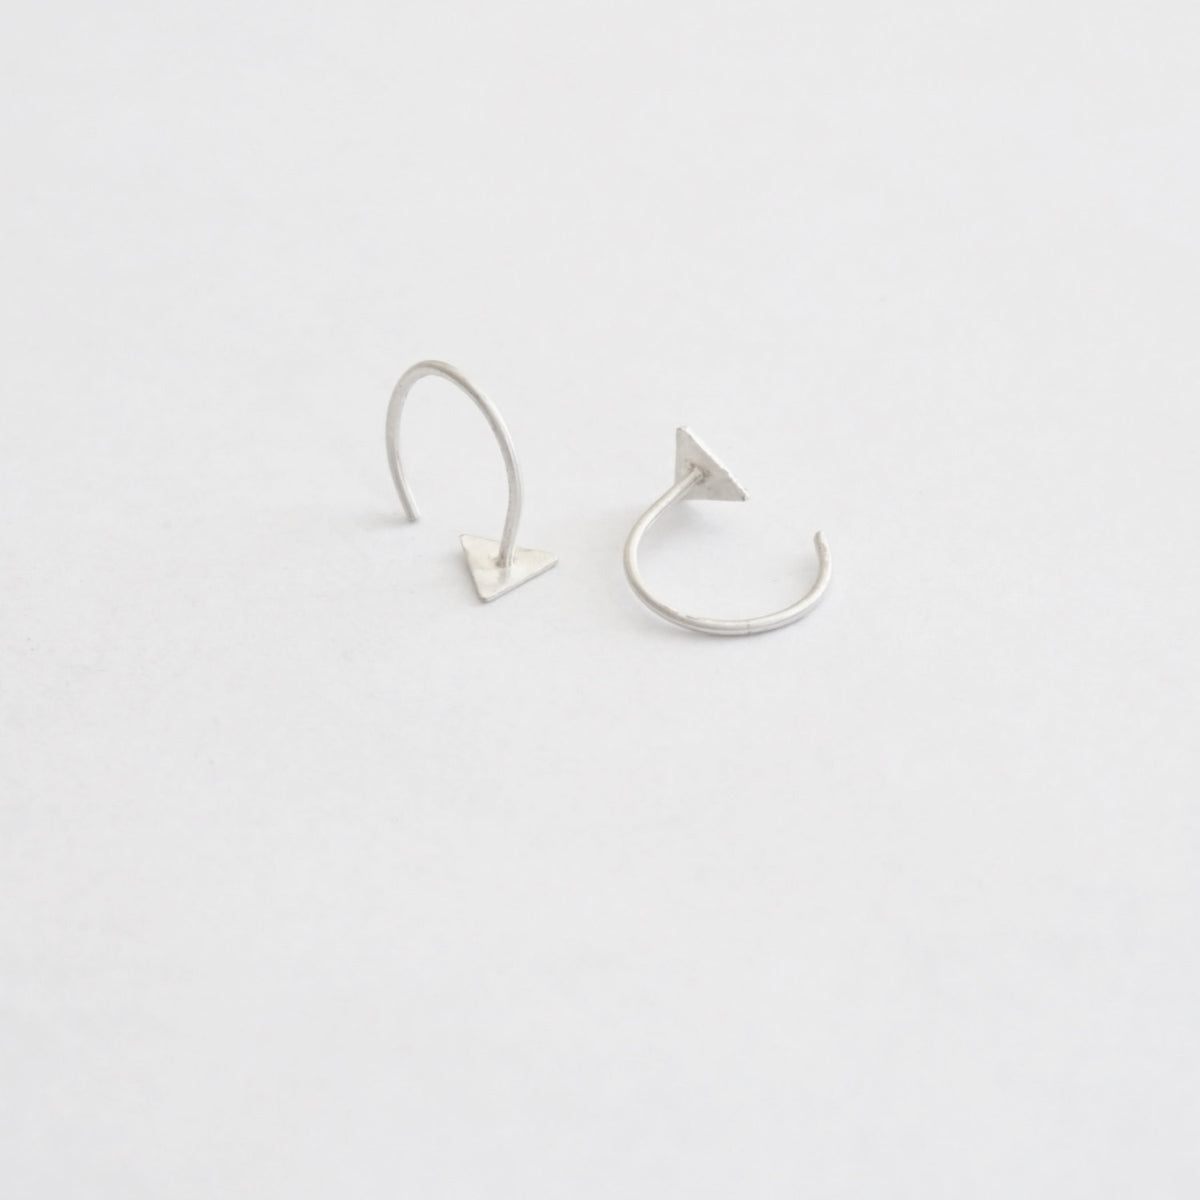 Boho Chic And Stylish, Hand-Made Ear Hugging Hoops With A Triangle Front - 0246 - Virginia Wynne Designs